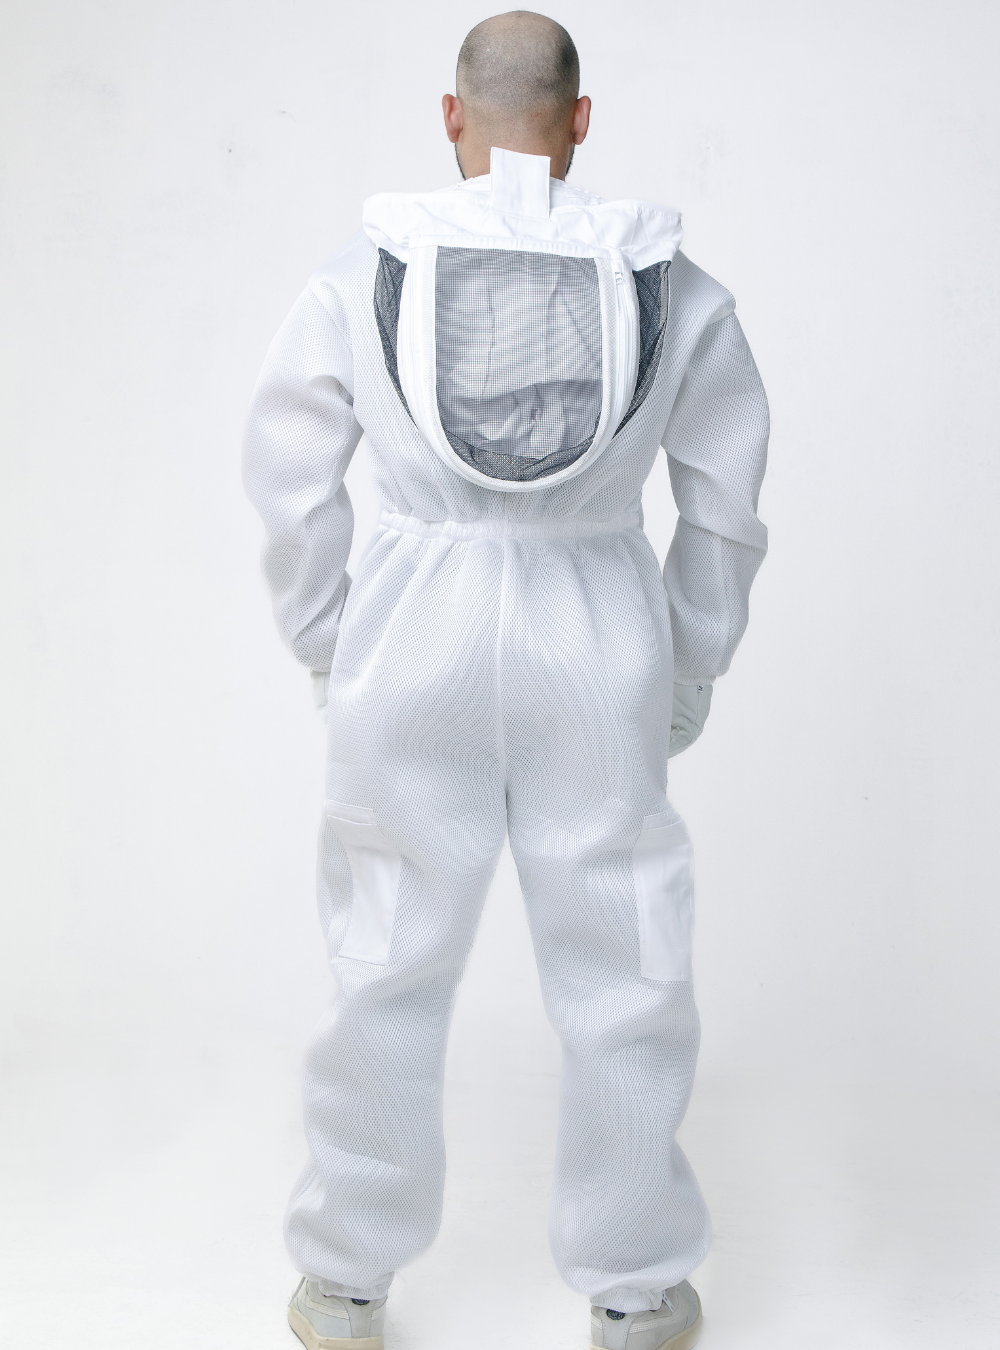 Back look of 3-Layer HiveSafe Triple Protection Suit incorporating a zippered front closure, detachable Fencing Vail.